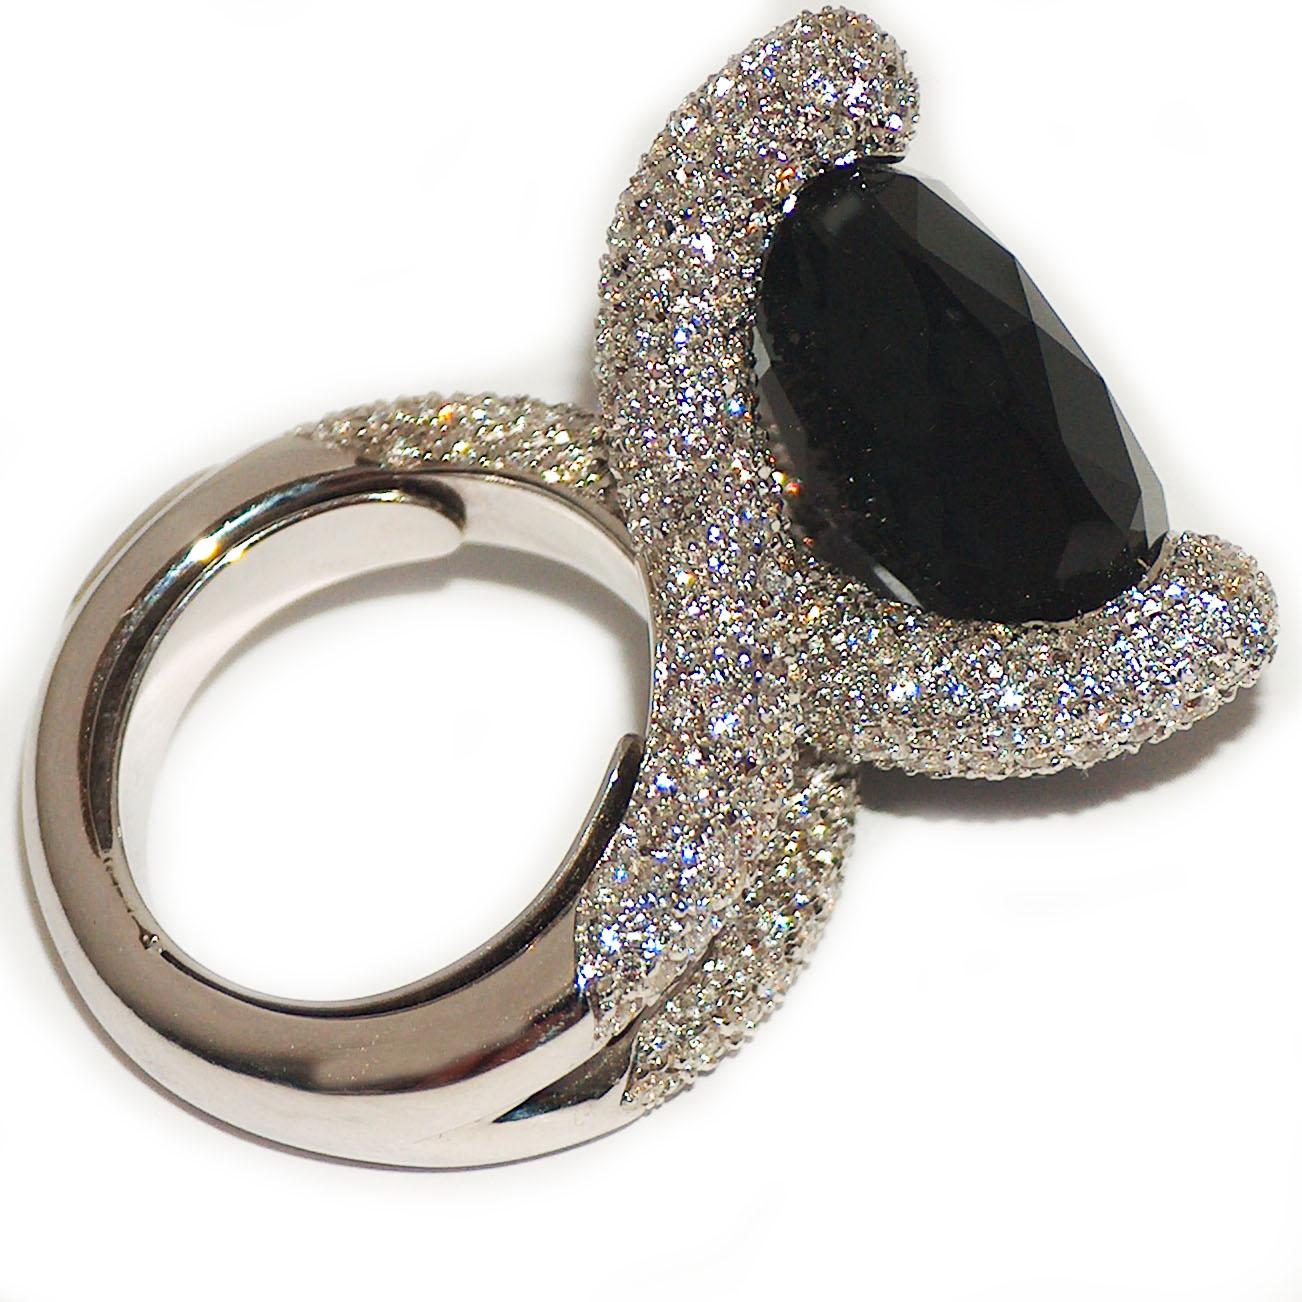 Ring in 18kt white gold which sets White Diamonds for ct. 5,90 and Onyx for ct. 25,00

Unique piece, designed and handcrafted in Italy, by visionary goldsmith Paolo Piovan. 

Quintessentially chic, this black and white glamorous statement ring is